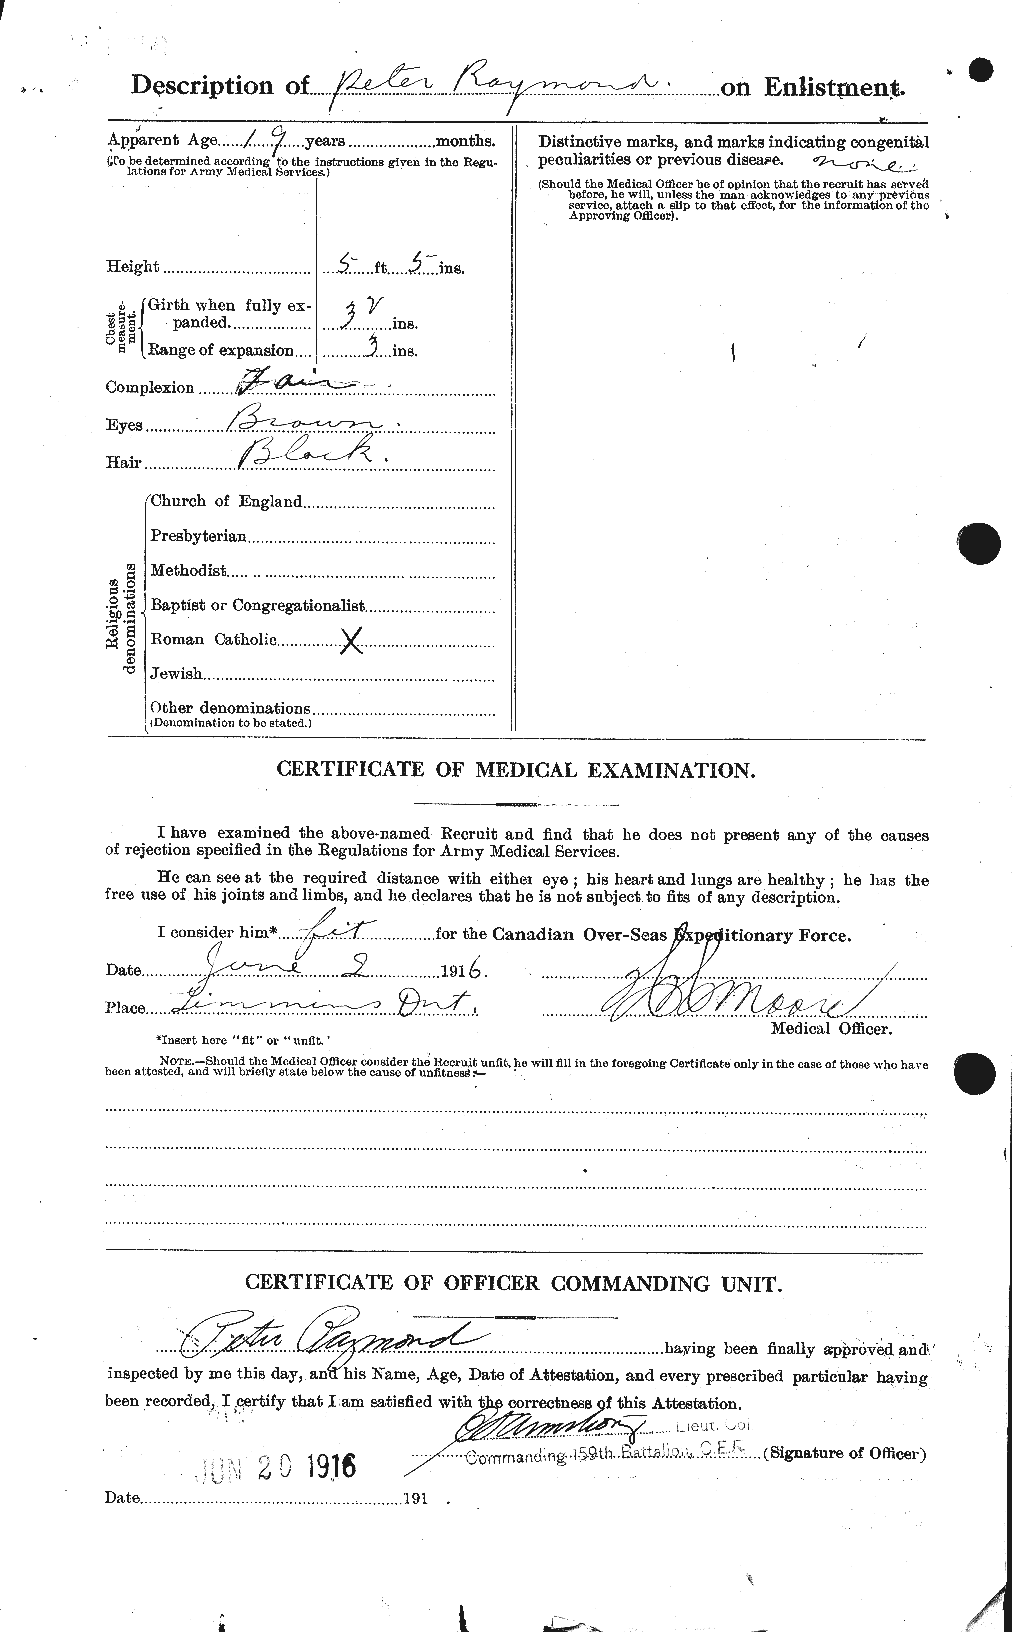 Personnel Records of the First World War - CEF 595440b